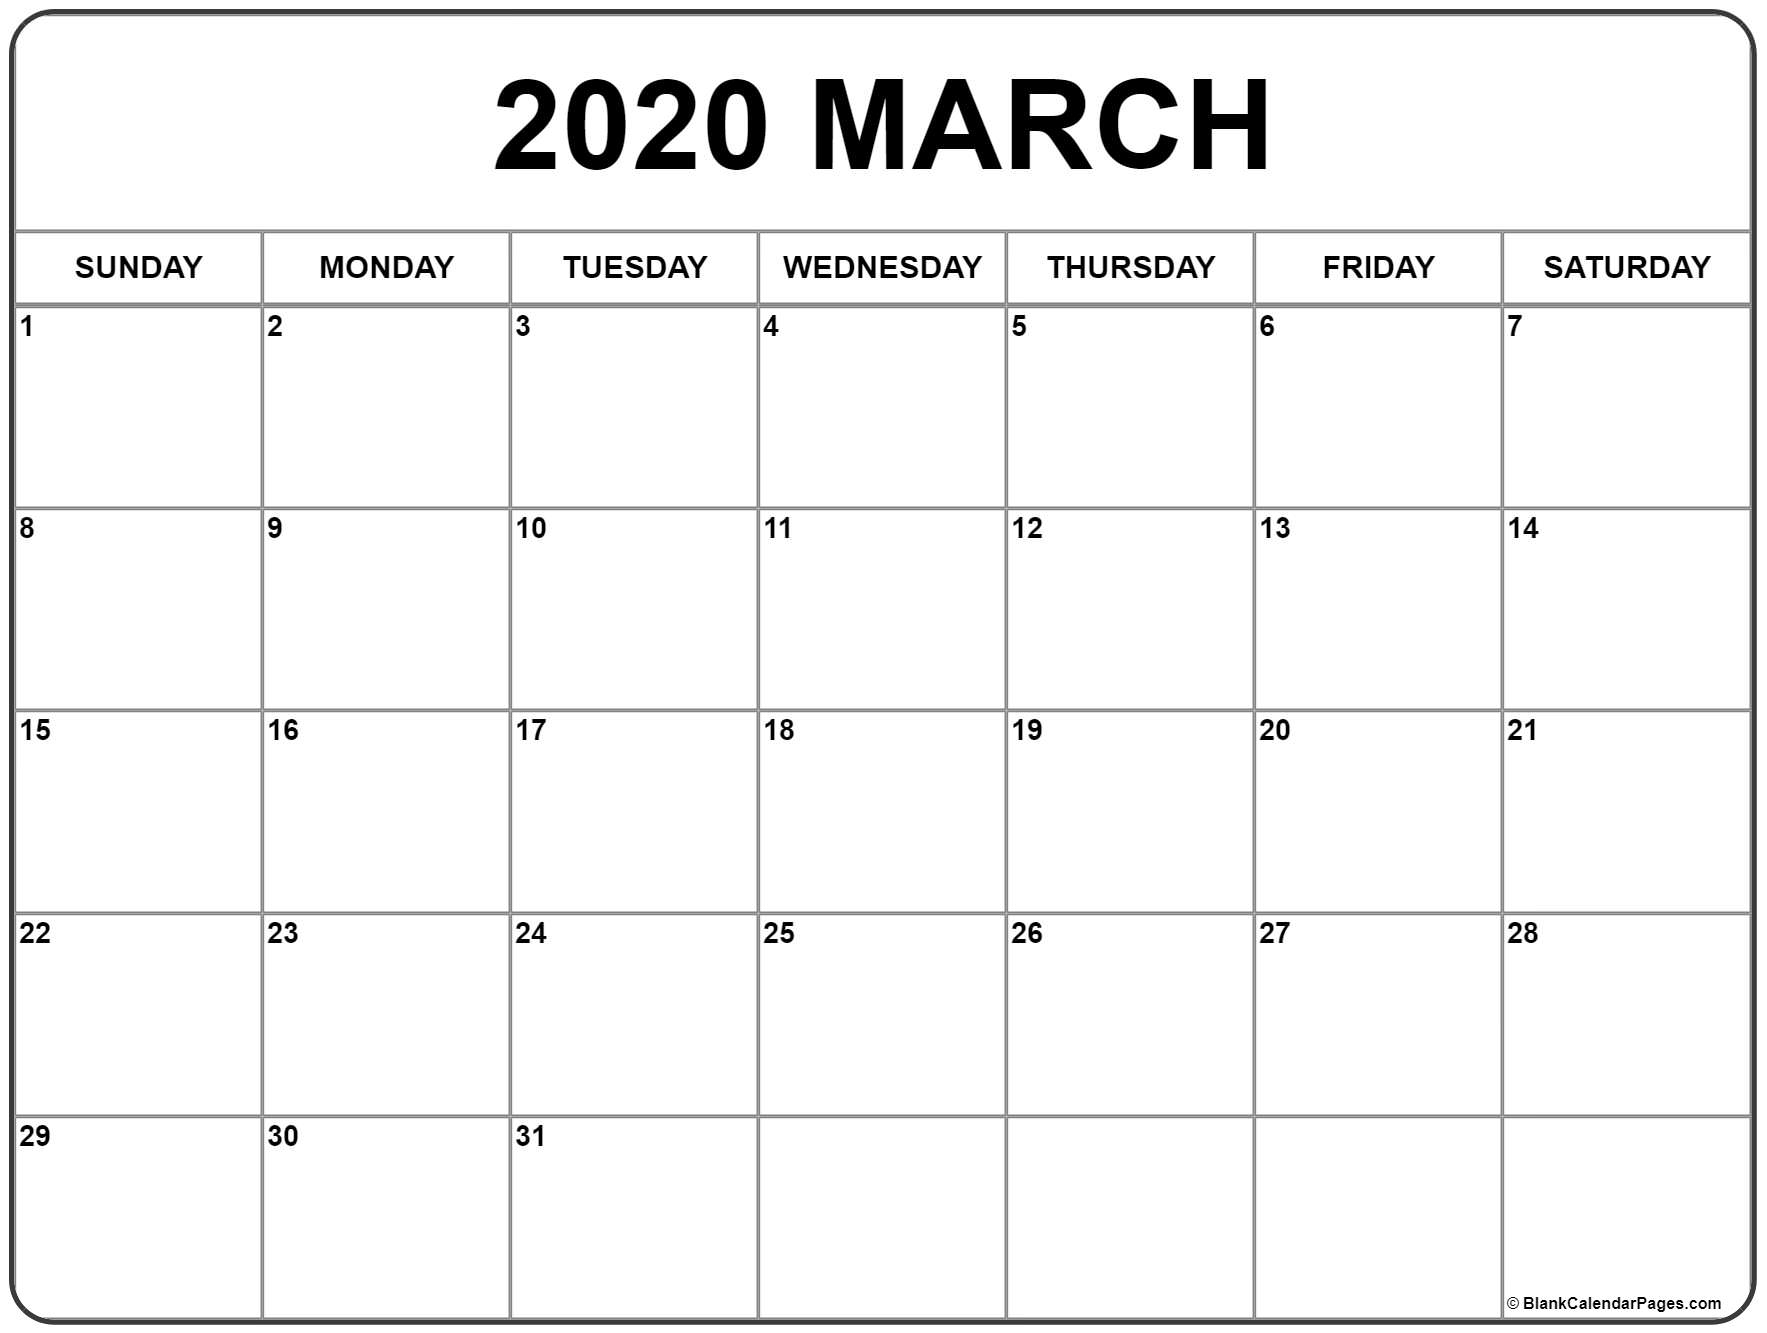 March 2020 Calendar | Free Printable Monthly Calendars within 2020 Calander To Write On